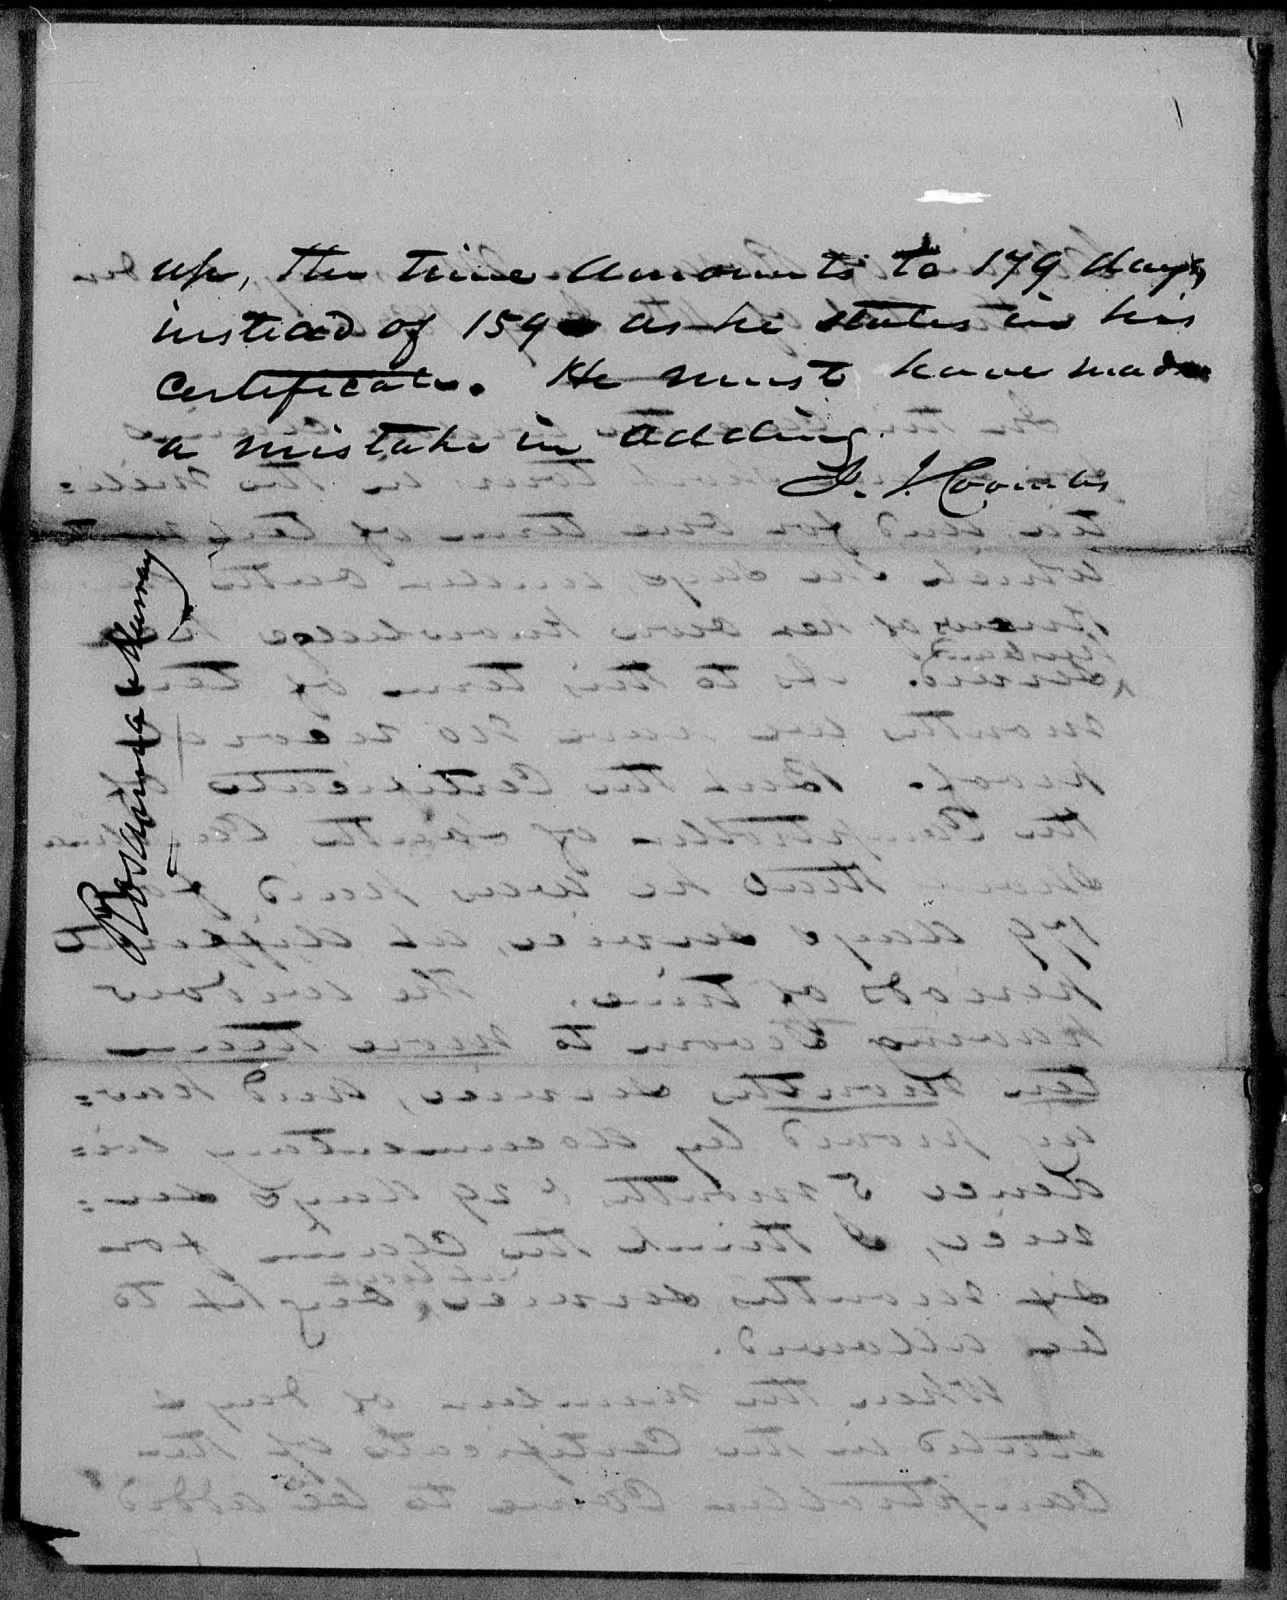 Report of the Pension of Susana Murray from J. J. Combs, circa December 1849, page 2